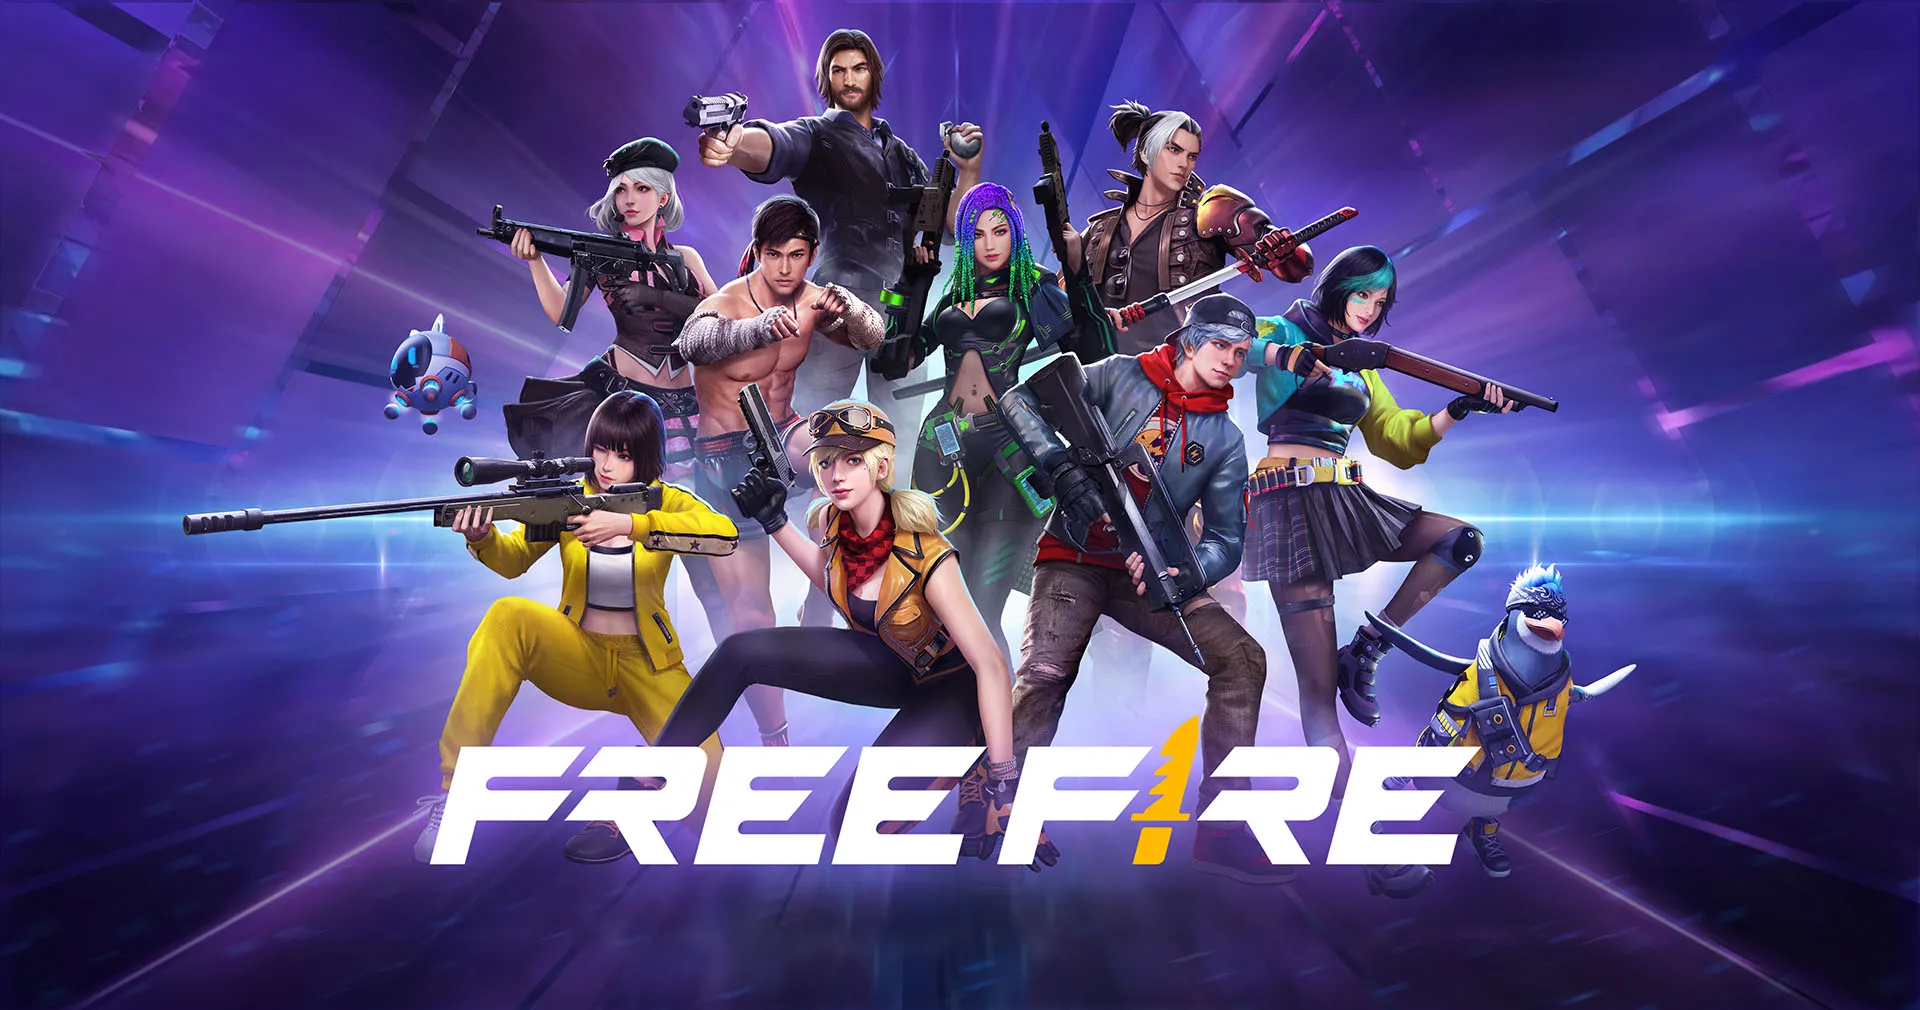 600+] Free Fire Wallpapers | Wallpapers.com